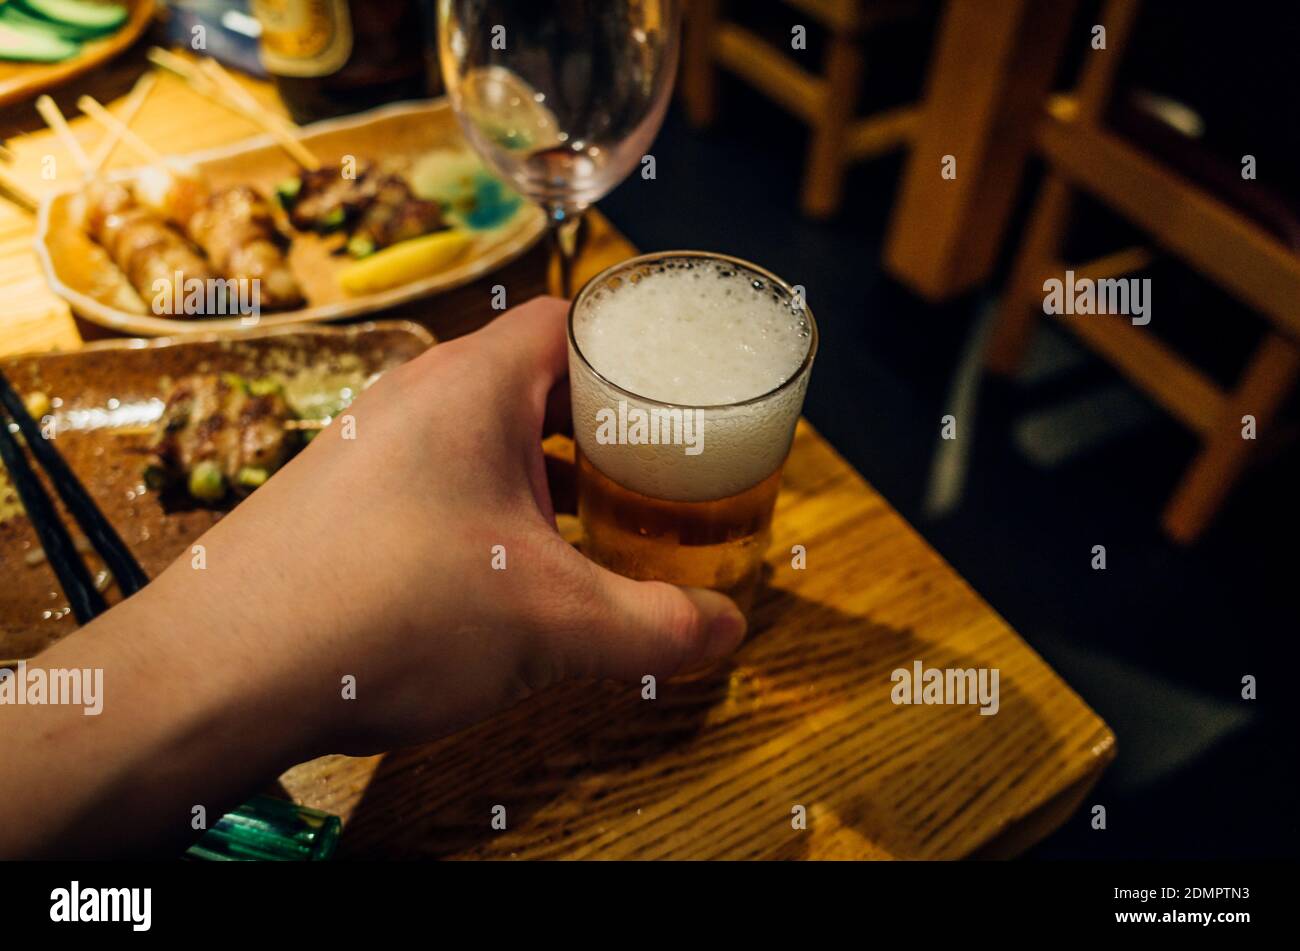 Cropped Hand Holding Beer Glass On Restaurant Table At Night Stock Photo Alamy